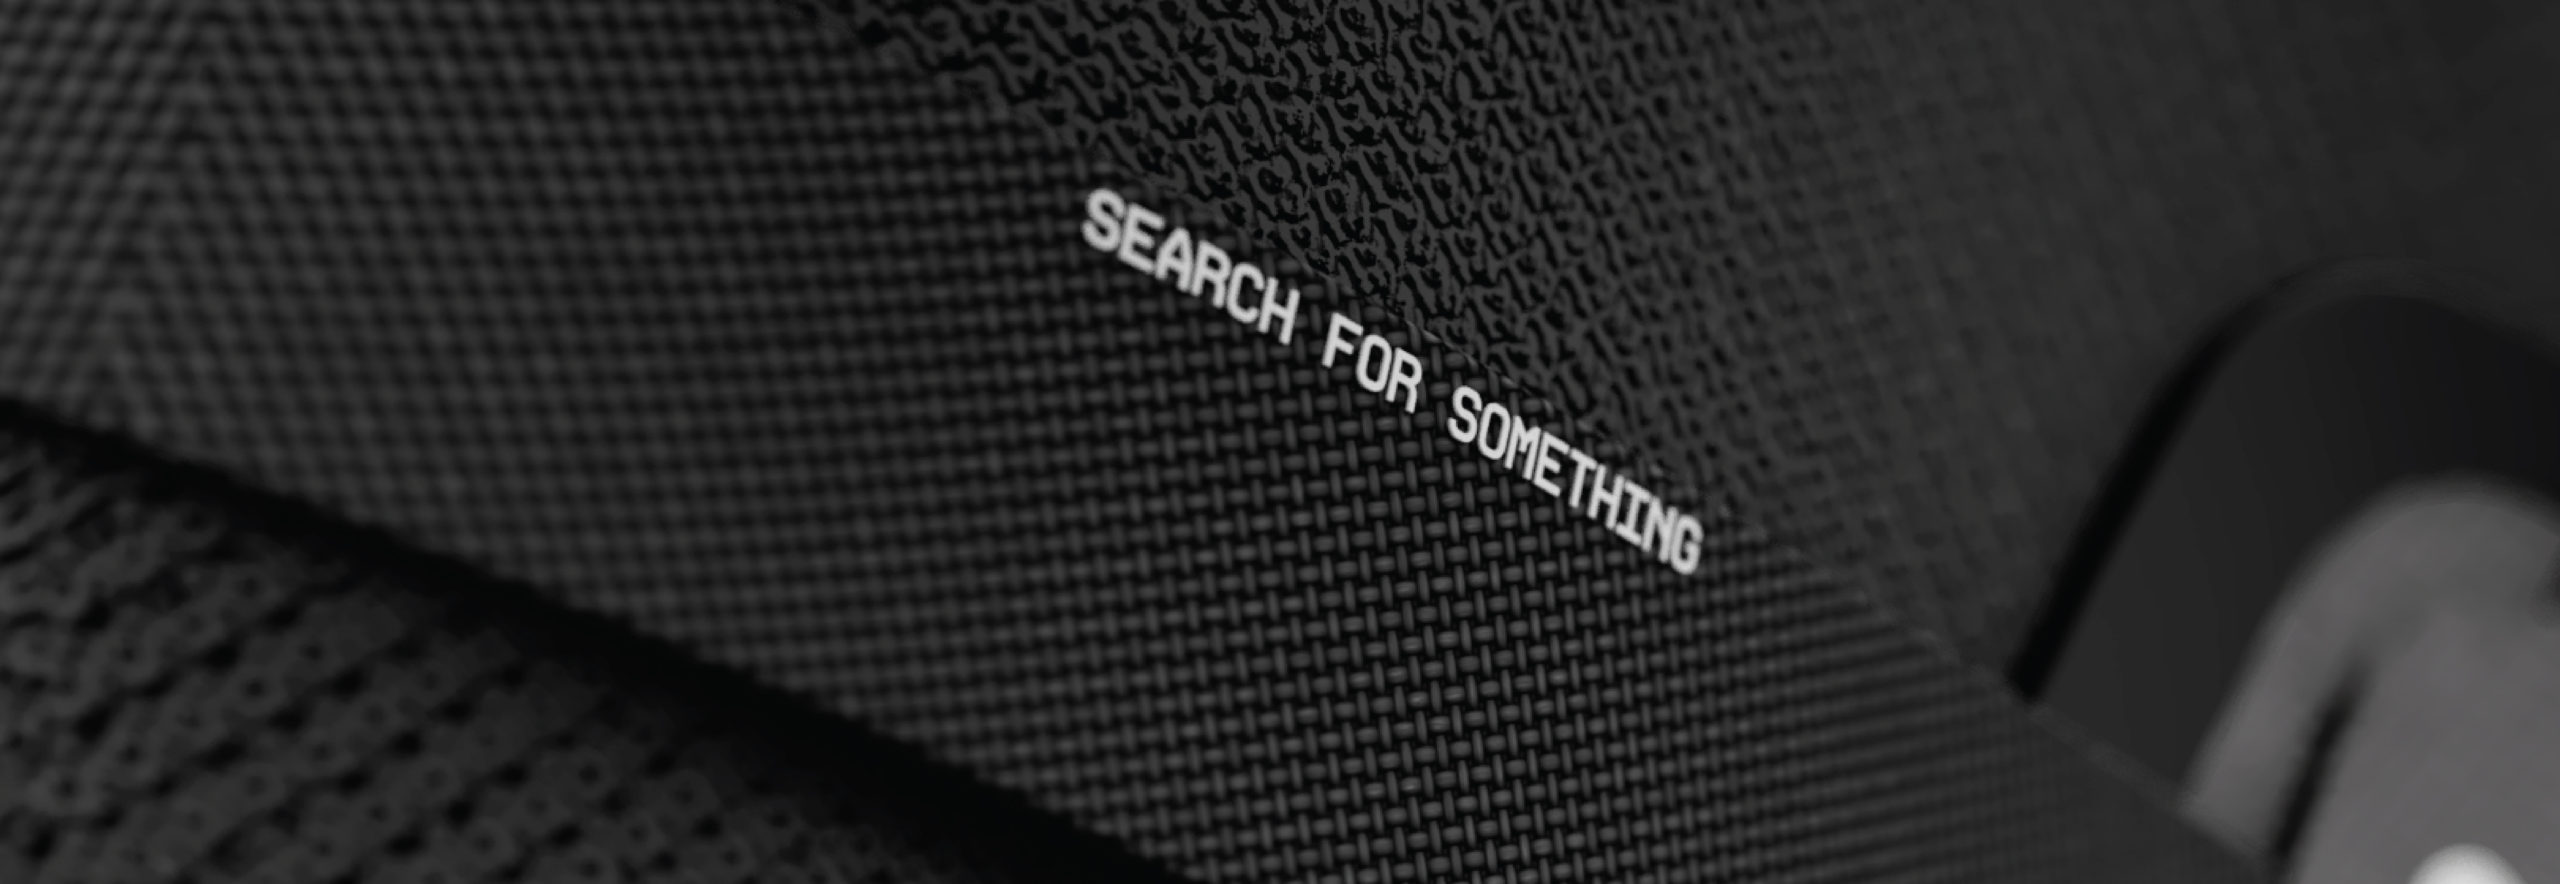 search for something-01